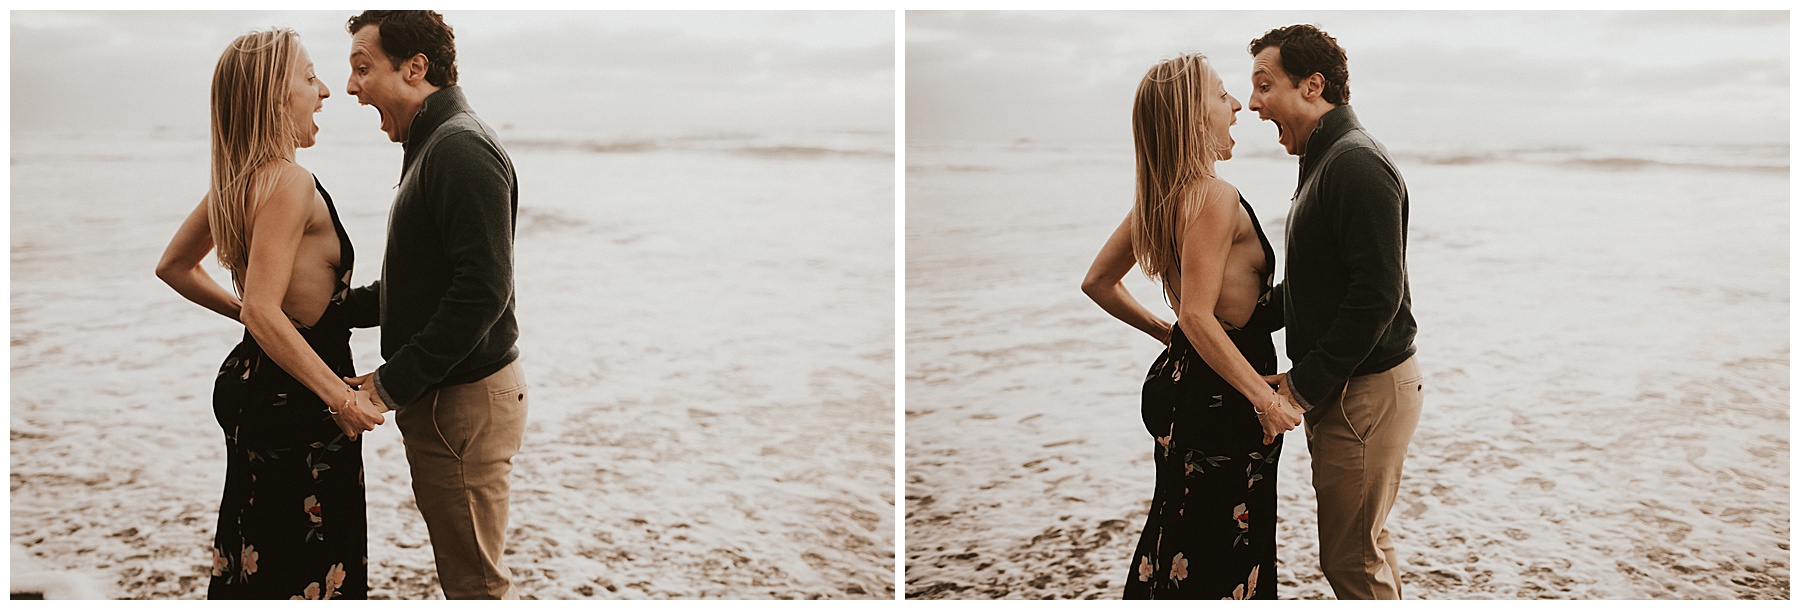 Sunset anniversary session, coastal anniversary session by Juju Photography